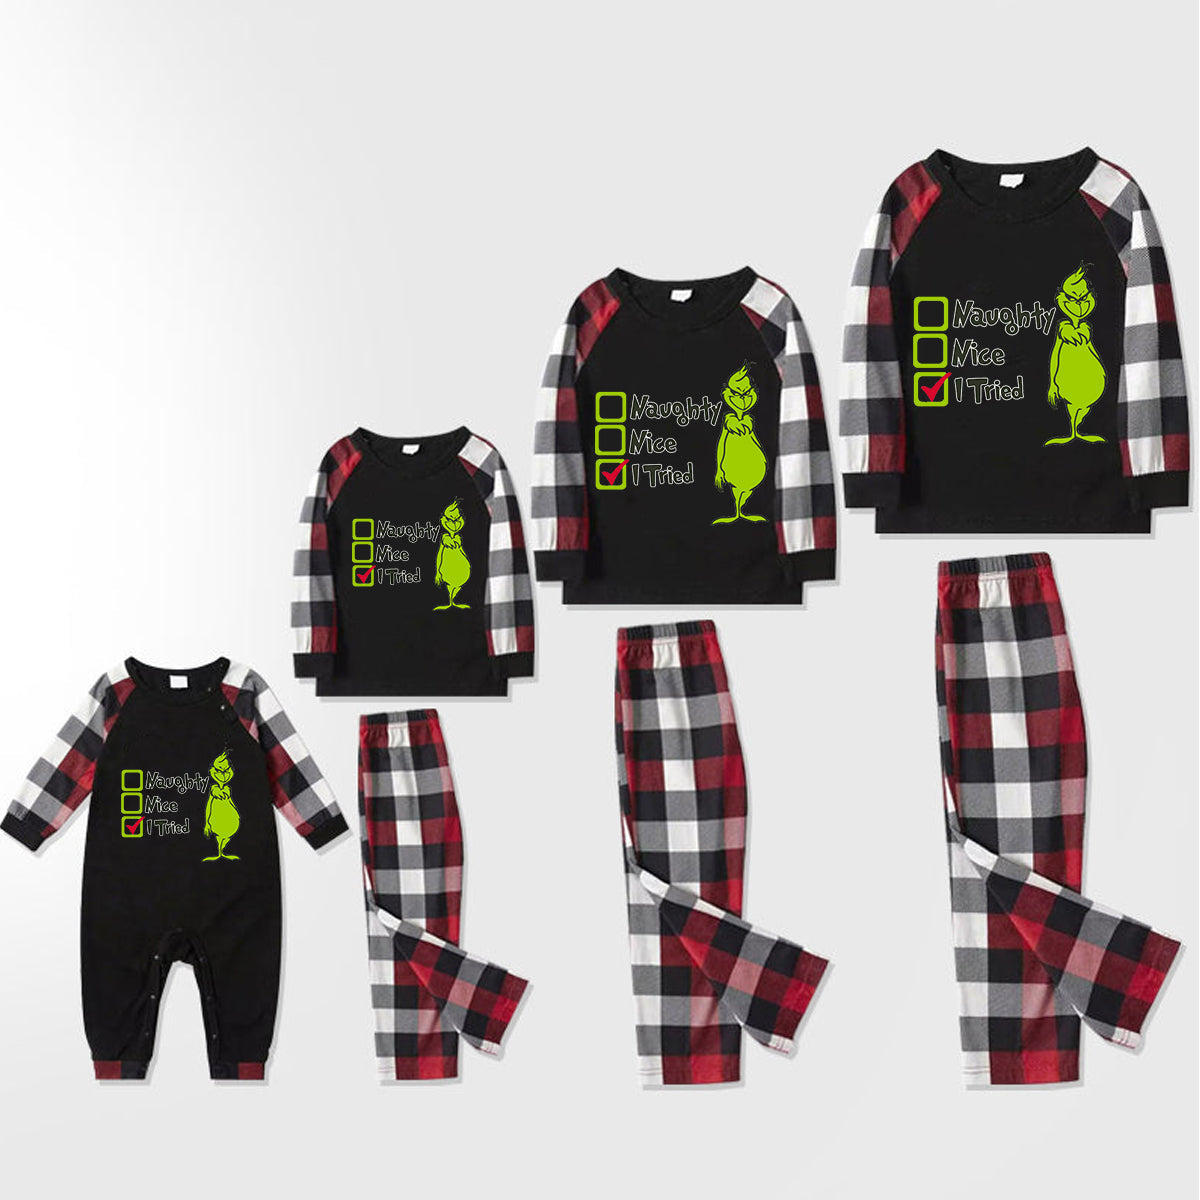 Christmas "Naughty&Nice& I Tried" Letter Print Patterned Casual Long Sleeve Sweatshirts Contrast Tops and Red & Black & White Plaid Pants Family Matching Pajamas Set With Pet Bandana